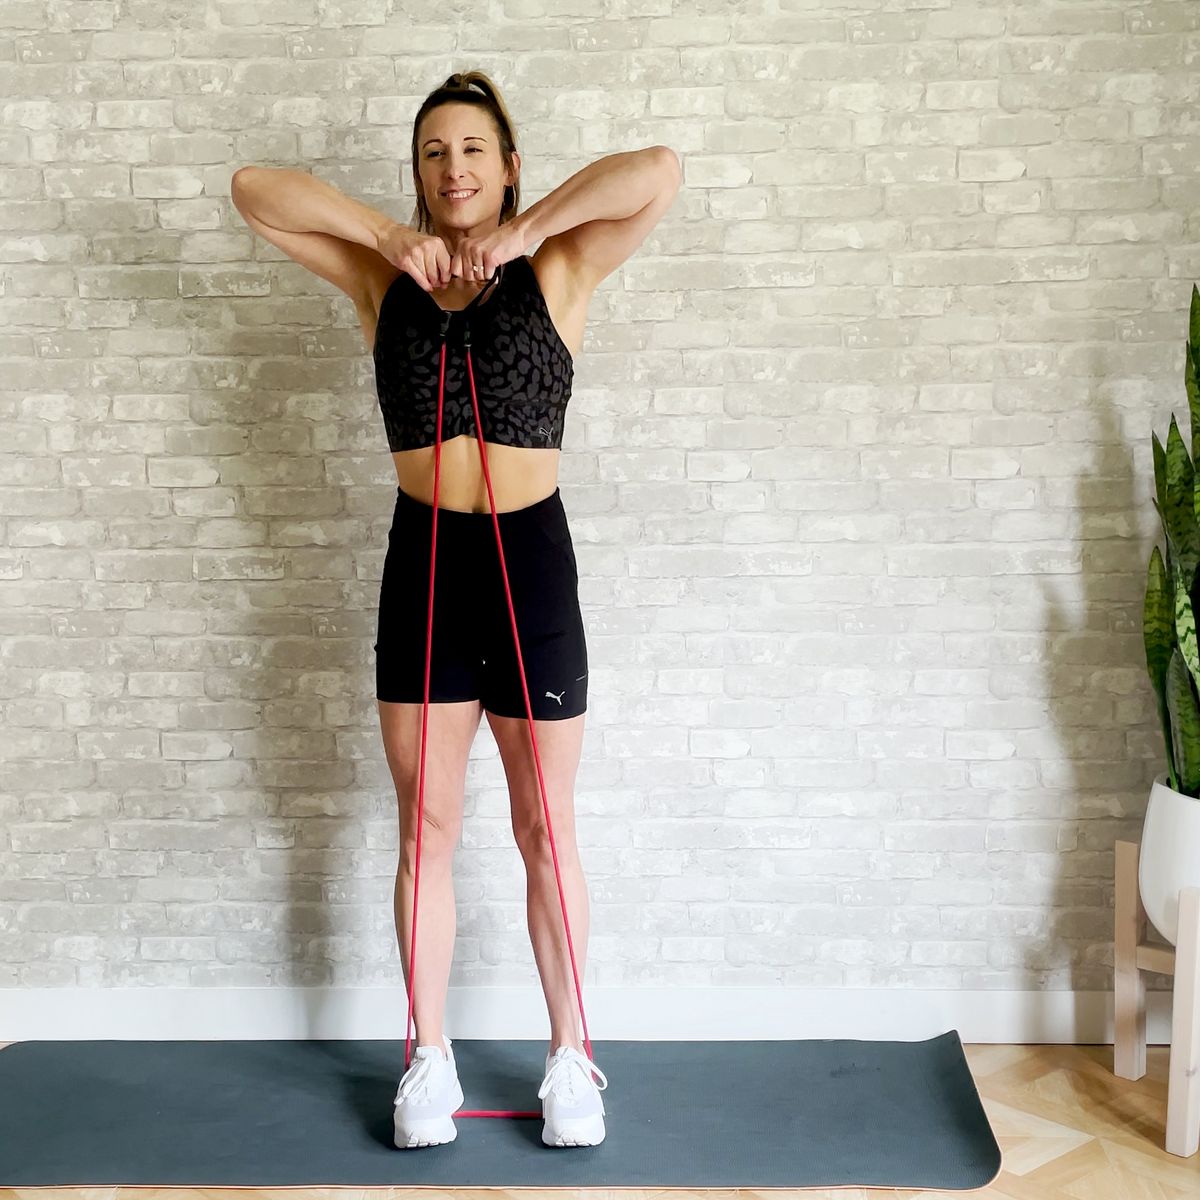 SHOULDER EXTENSION WITH ELASTIC BAND - Exercises routines